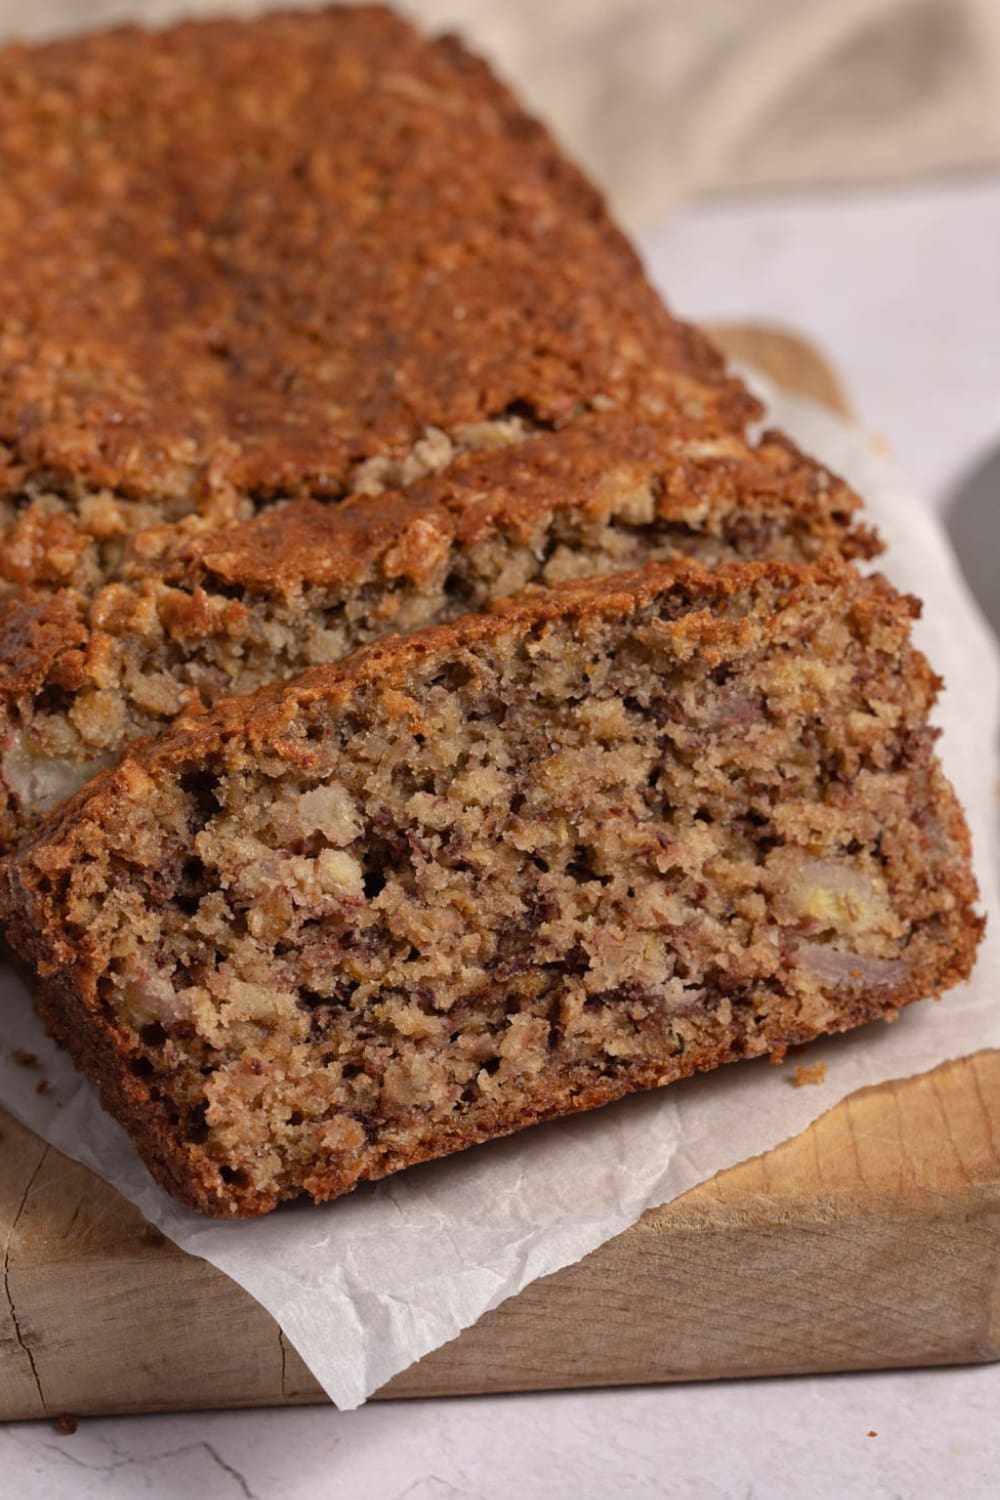 Slices of Homemade Oatmeal Banana Bread with Nuts